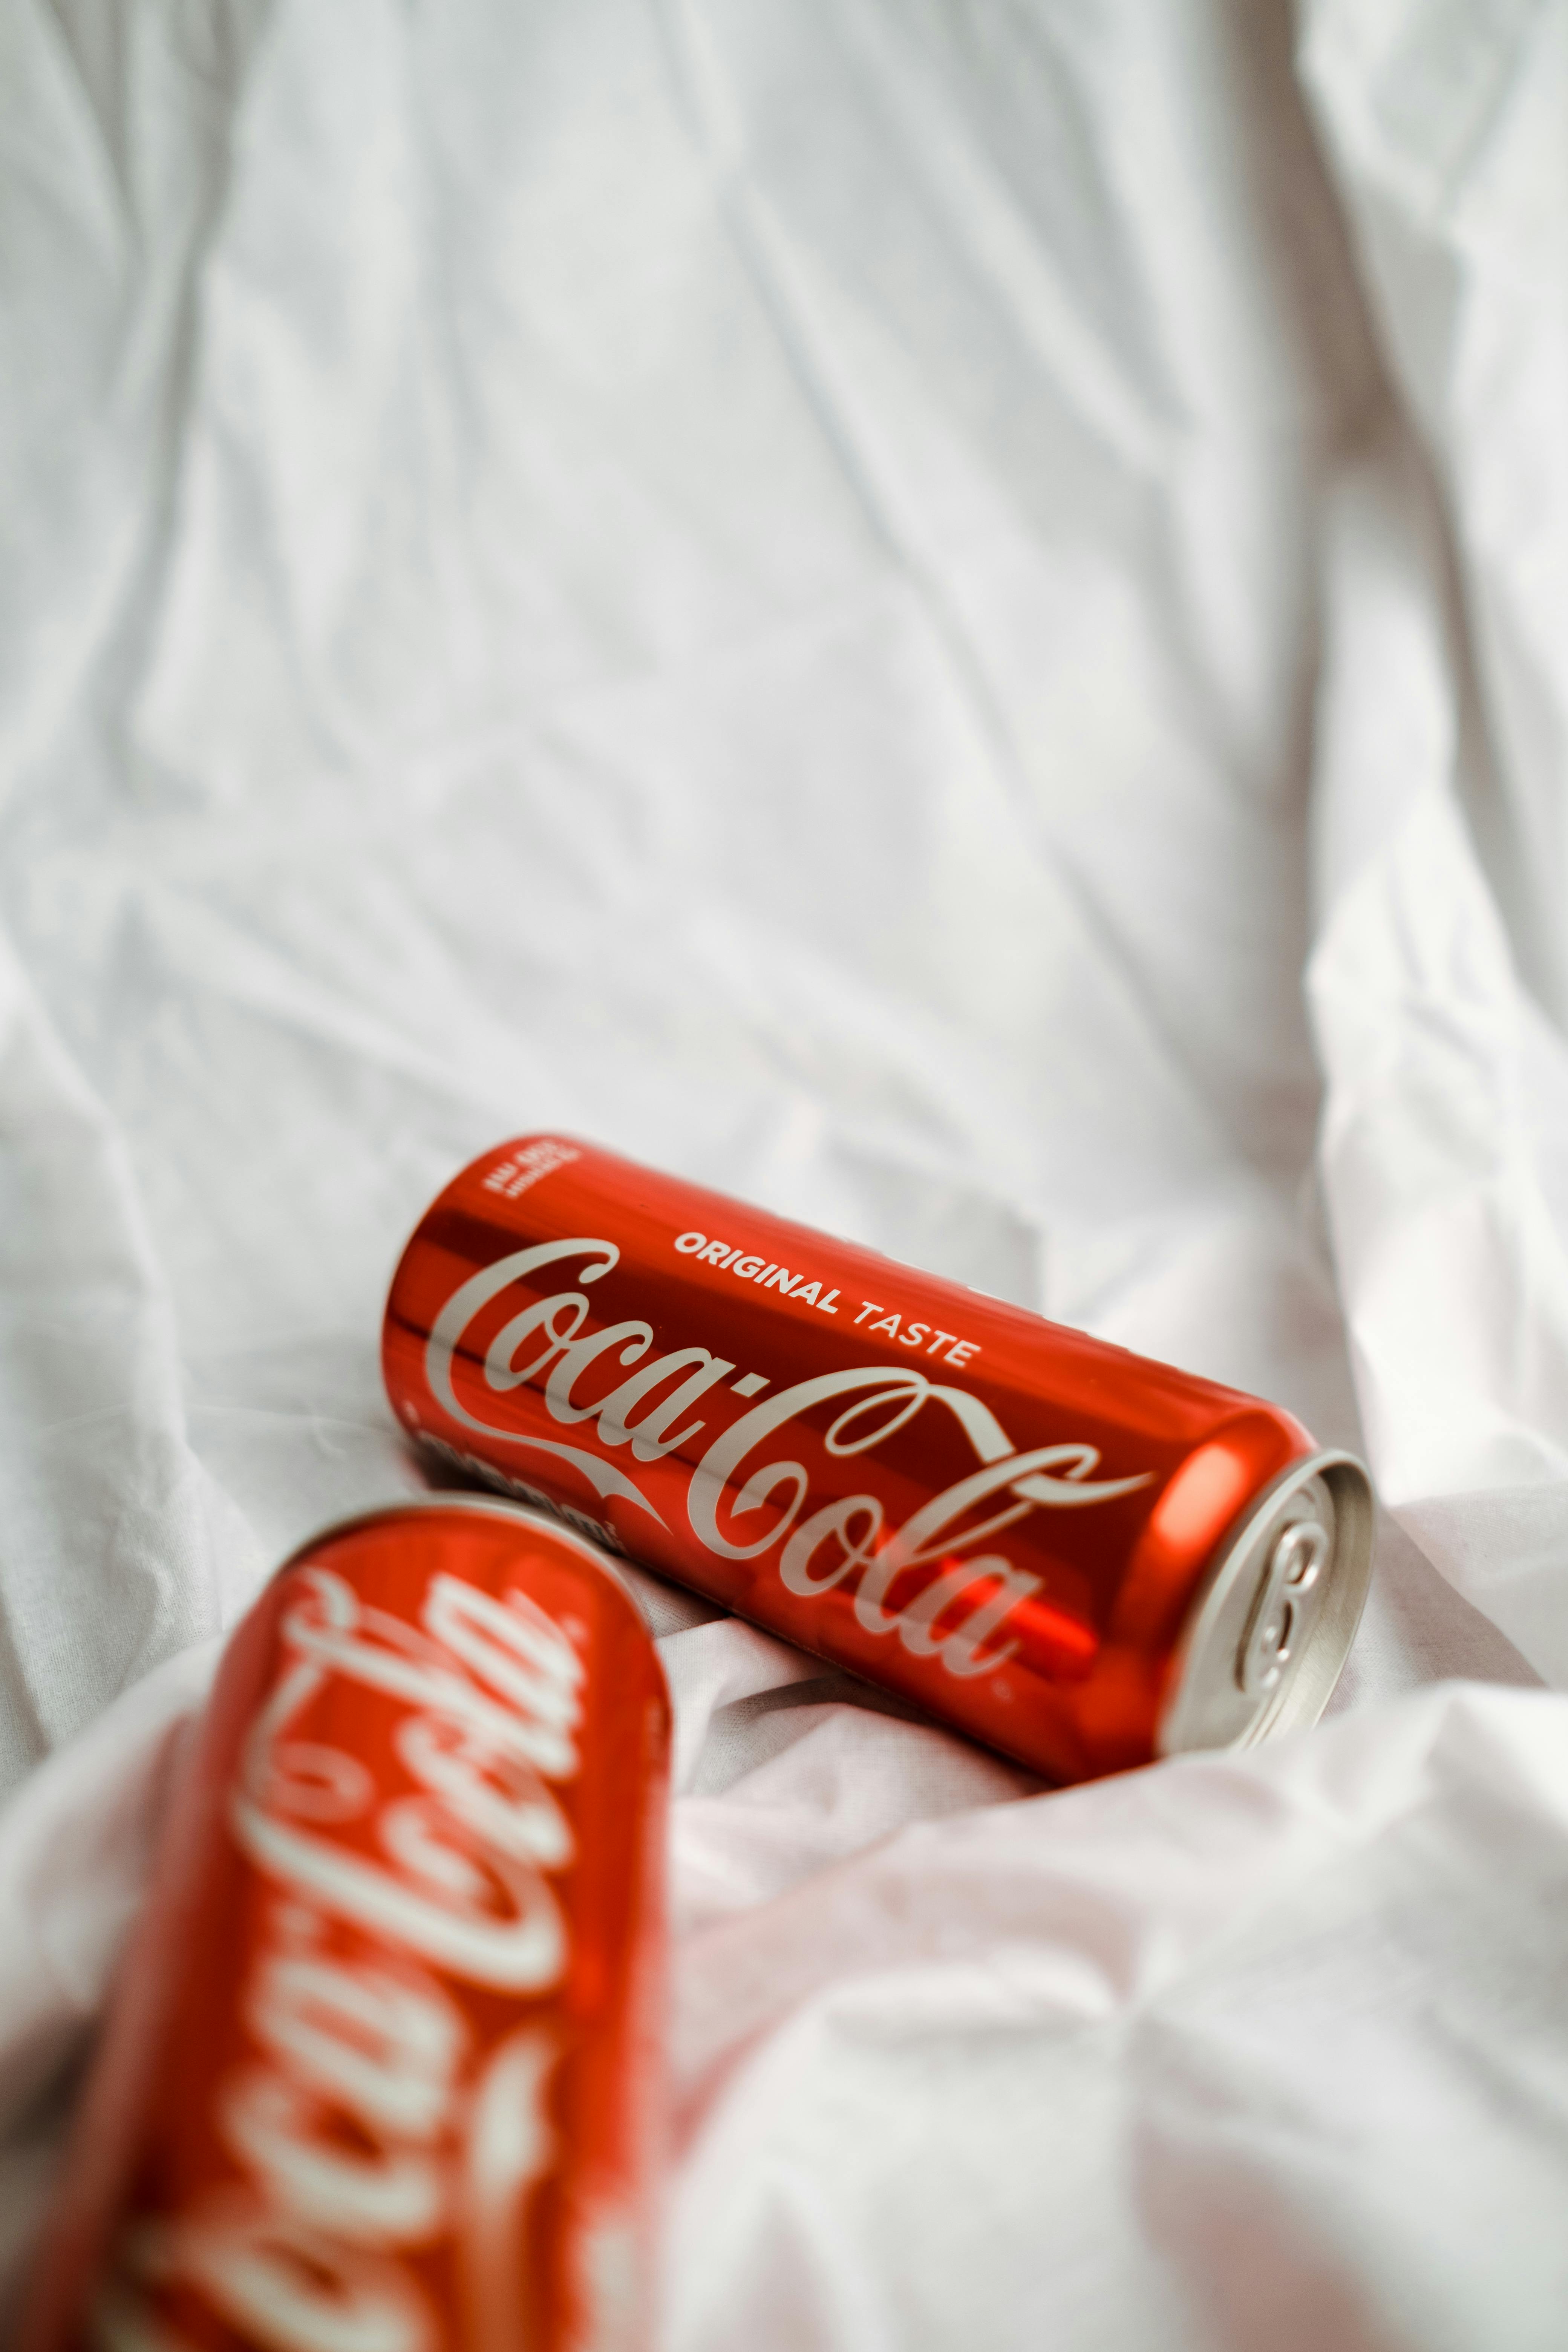 22,187 Coca Cola Logo Royalty-Free Photos and Stock Images